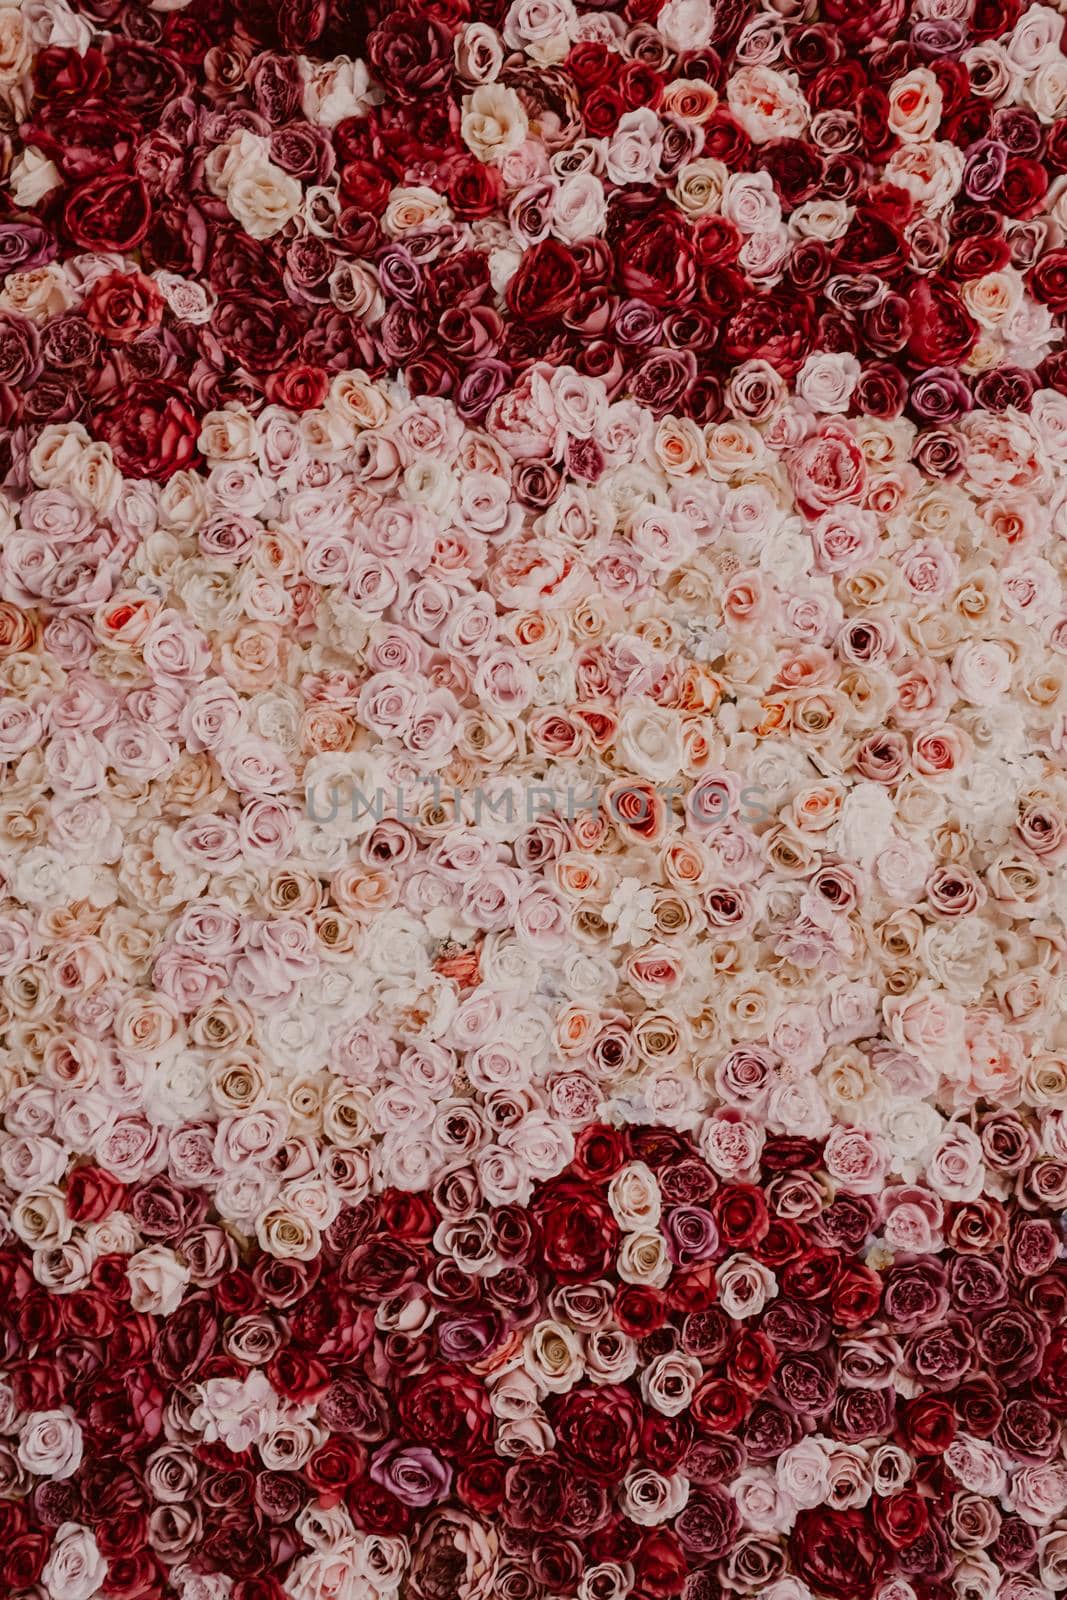 Amazing roses background. Million flowers in pink, red and white colors. Wedding decoration. Artificials, perfect for mock-up projects, design by kristina_kokhanova